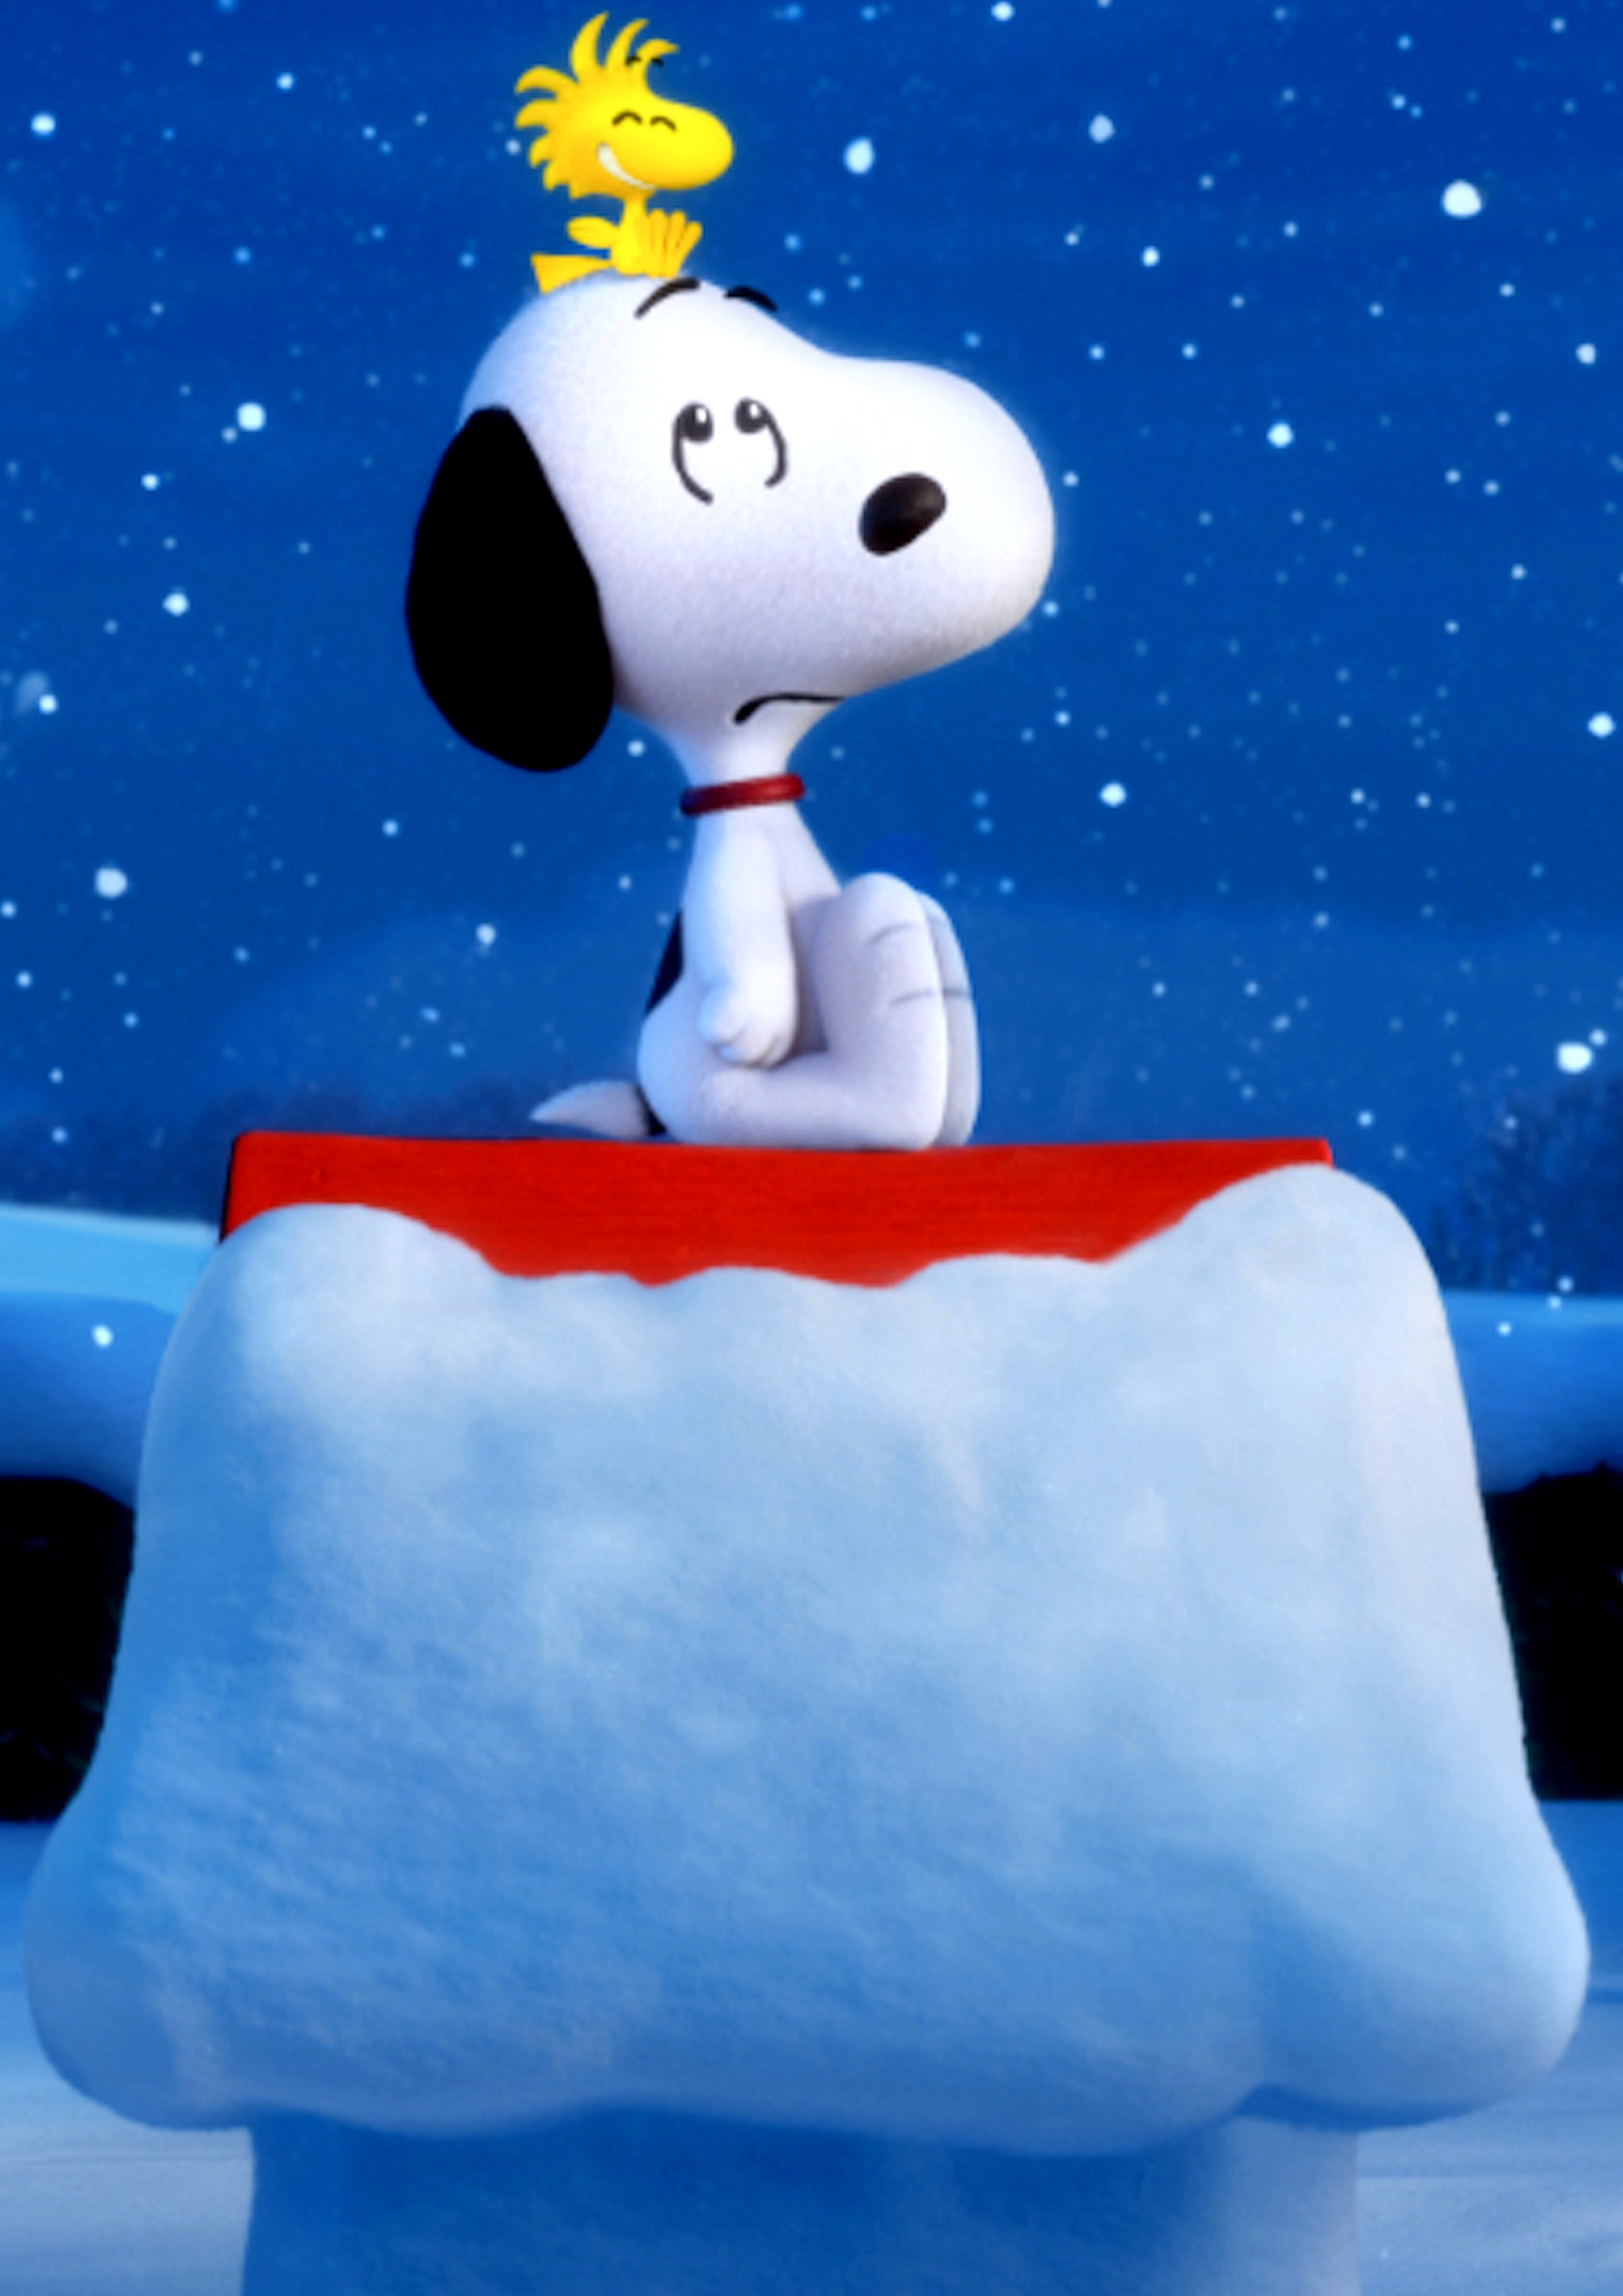 … The Peanuts Movie (Snoopy And Woodstock) by BradSnoopy97